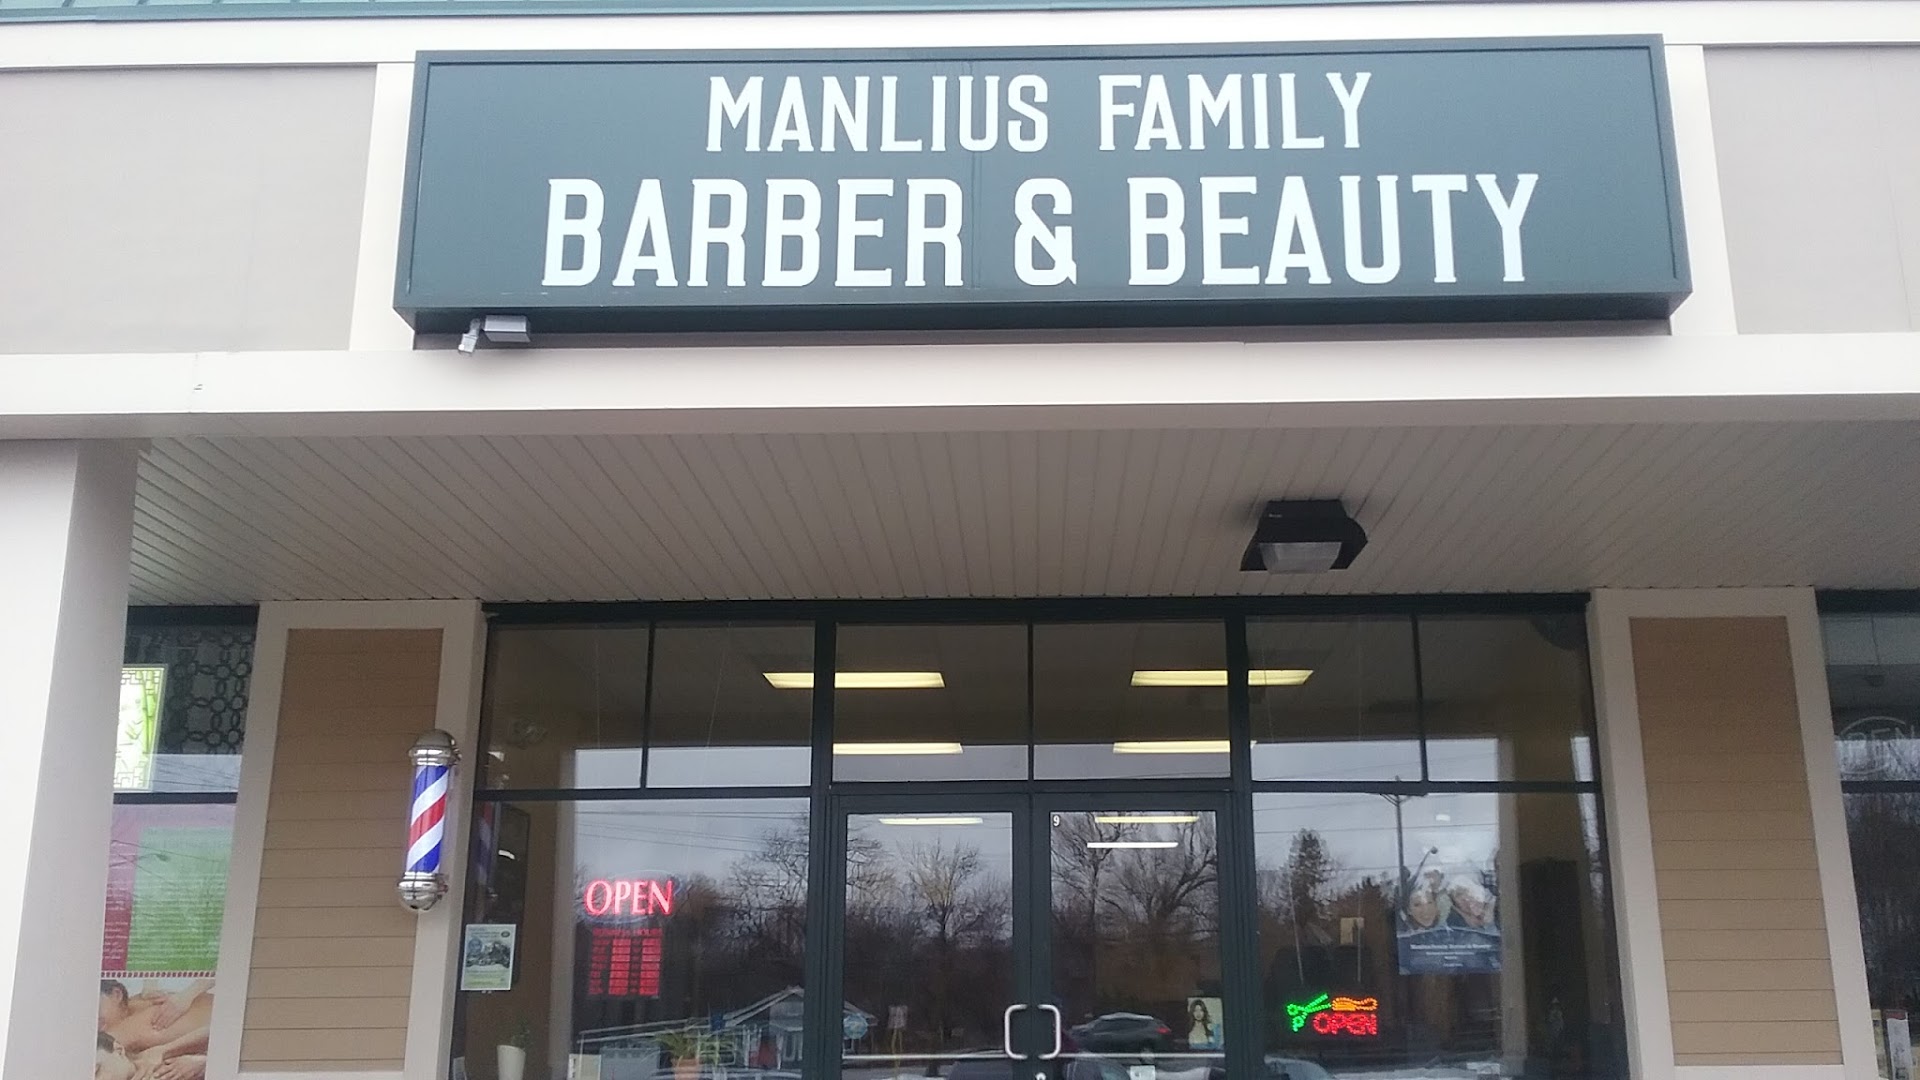 Manlius Family Barber and Beauty